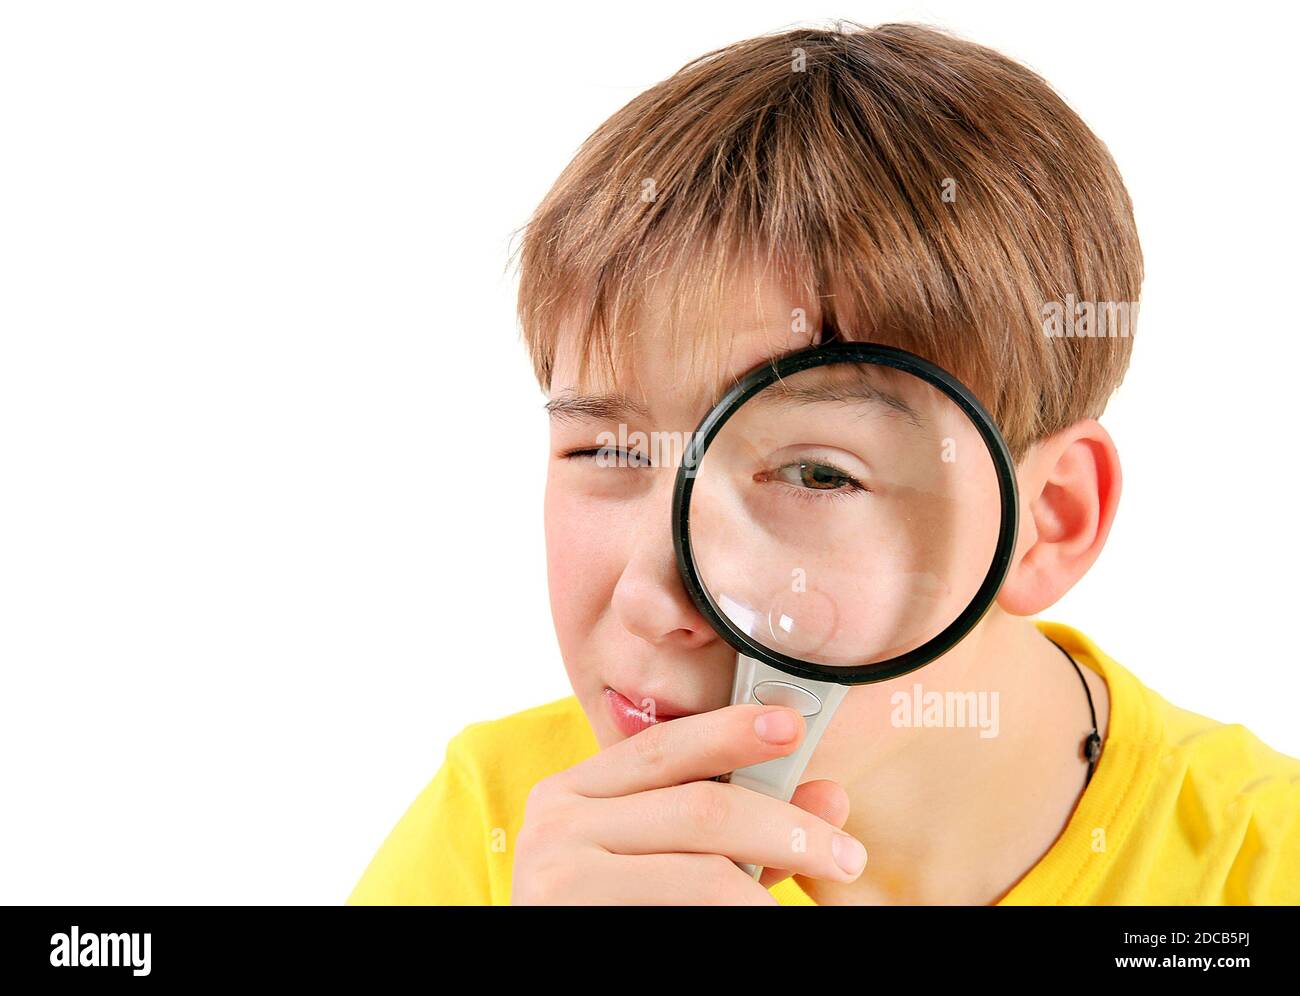 Curious Kid with Magnifying Glass Isolated on the White Background Stock Photo